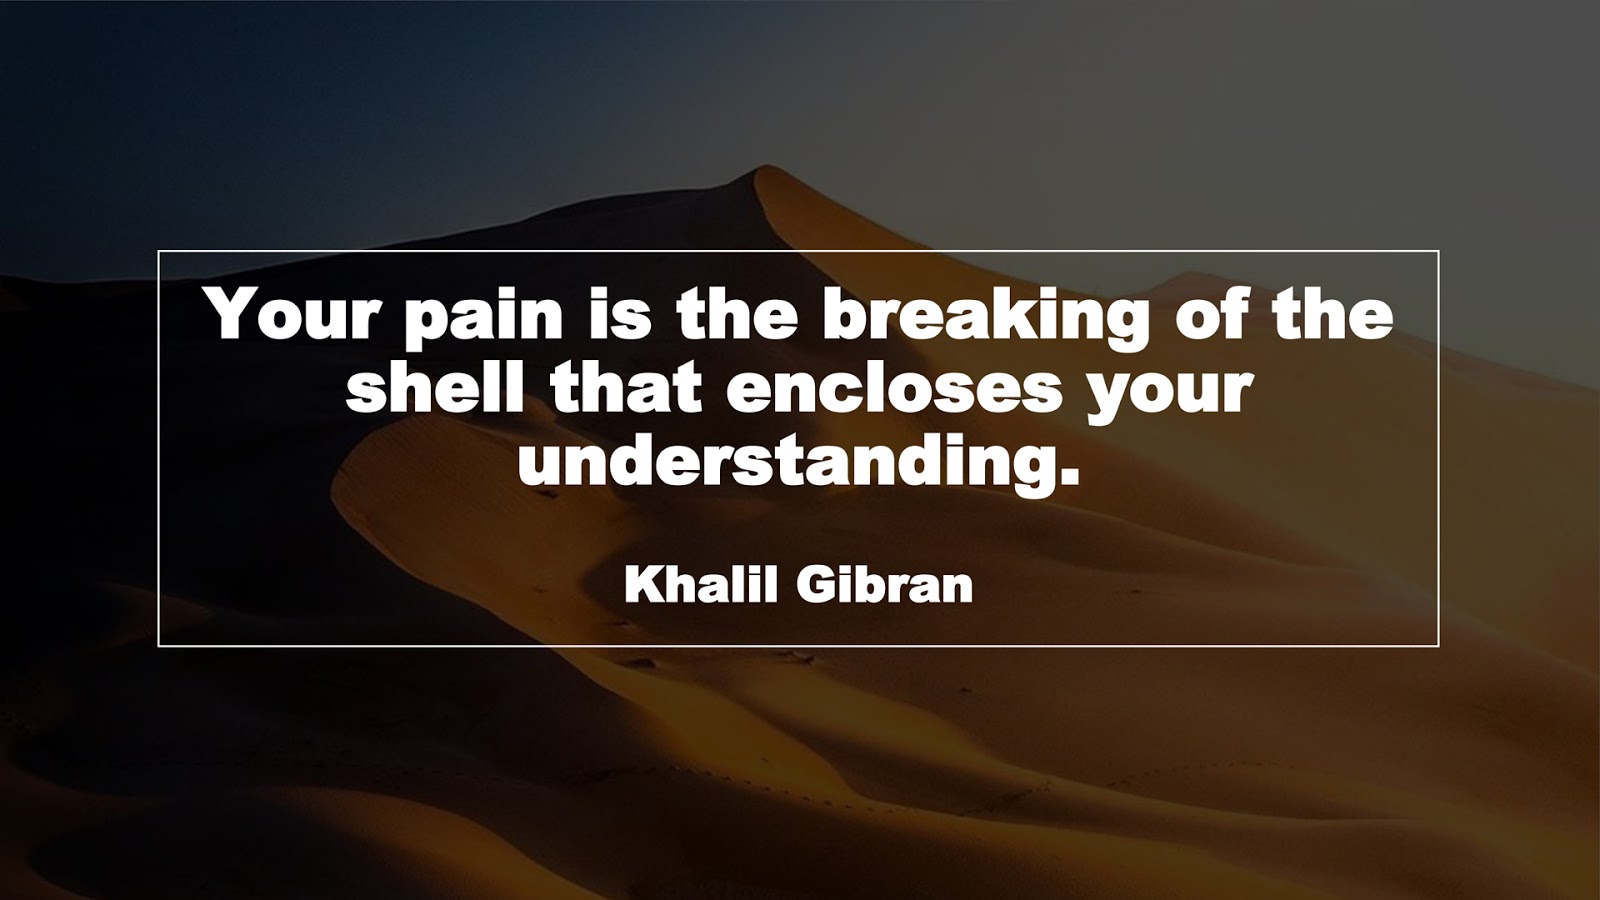 Your pain is the breaking of the shell that encloses your understanding. (Khalil Gibran)